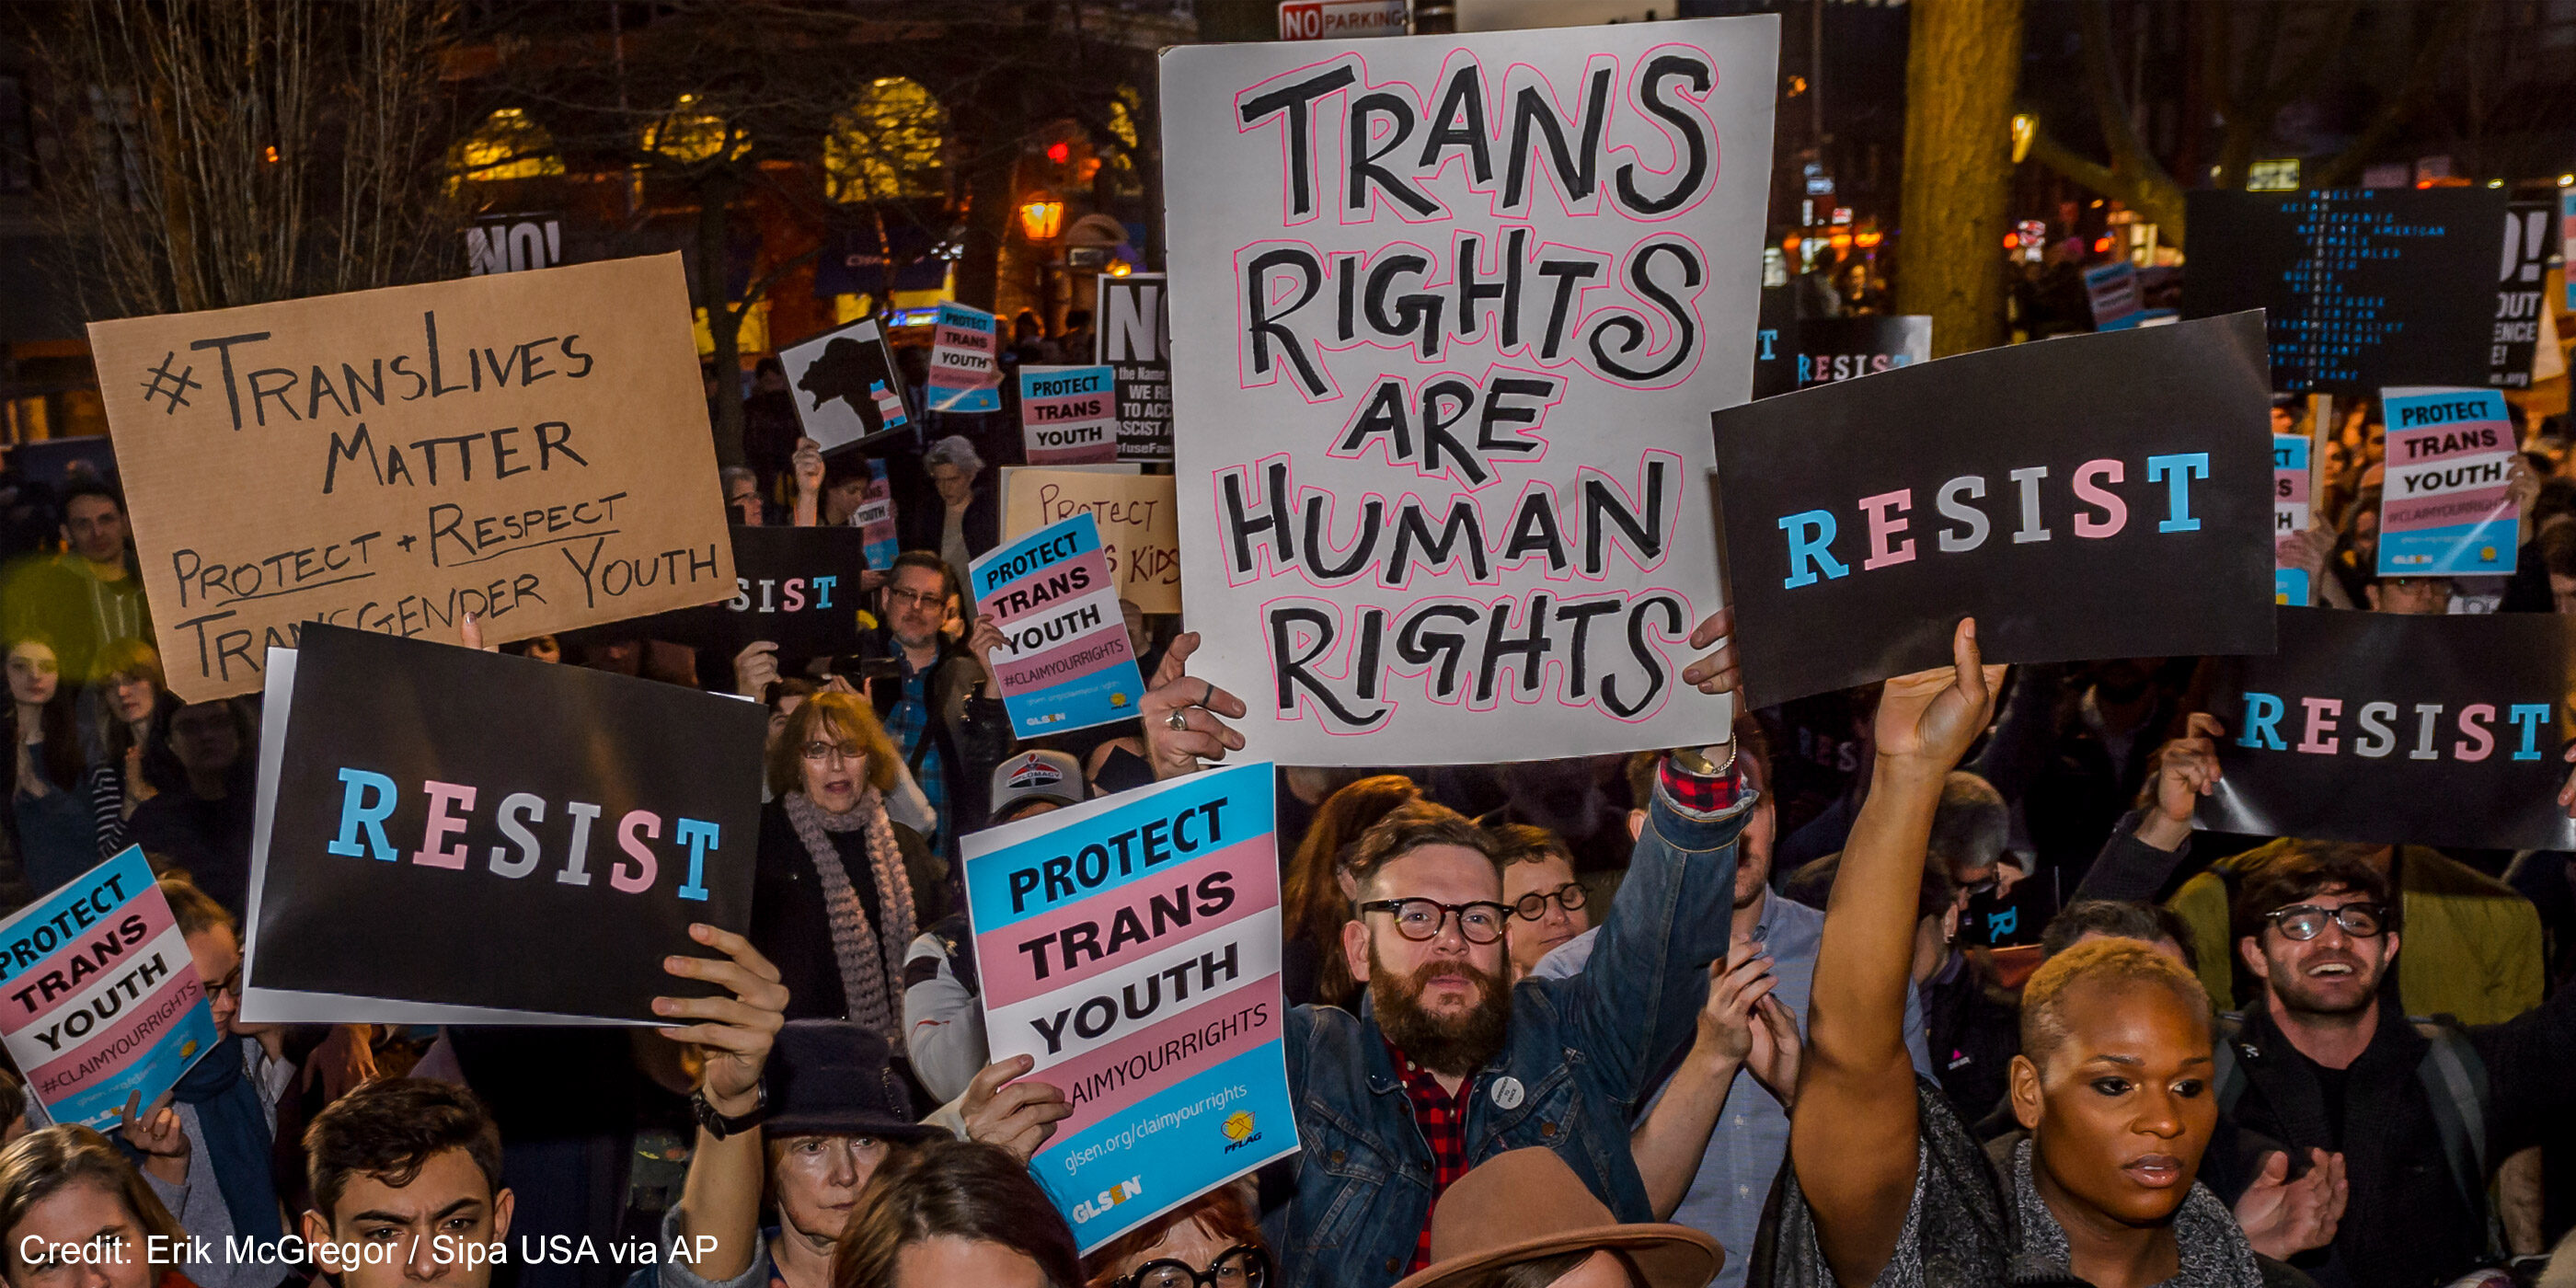 Group of people protesting for Trans peoples' rights.